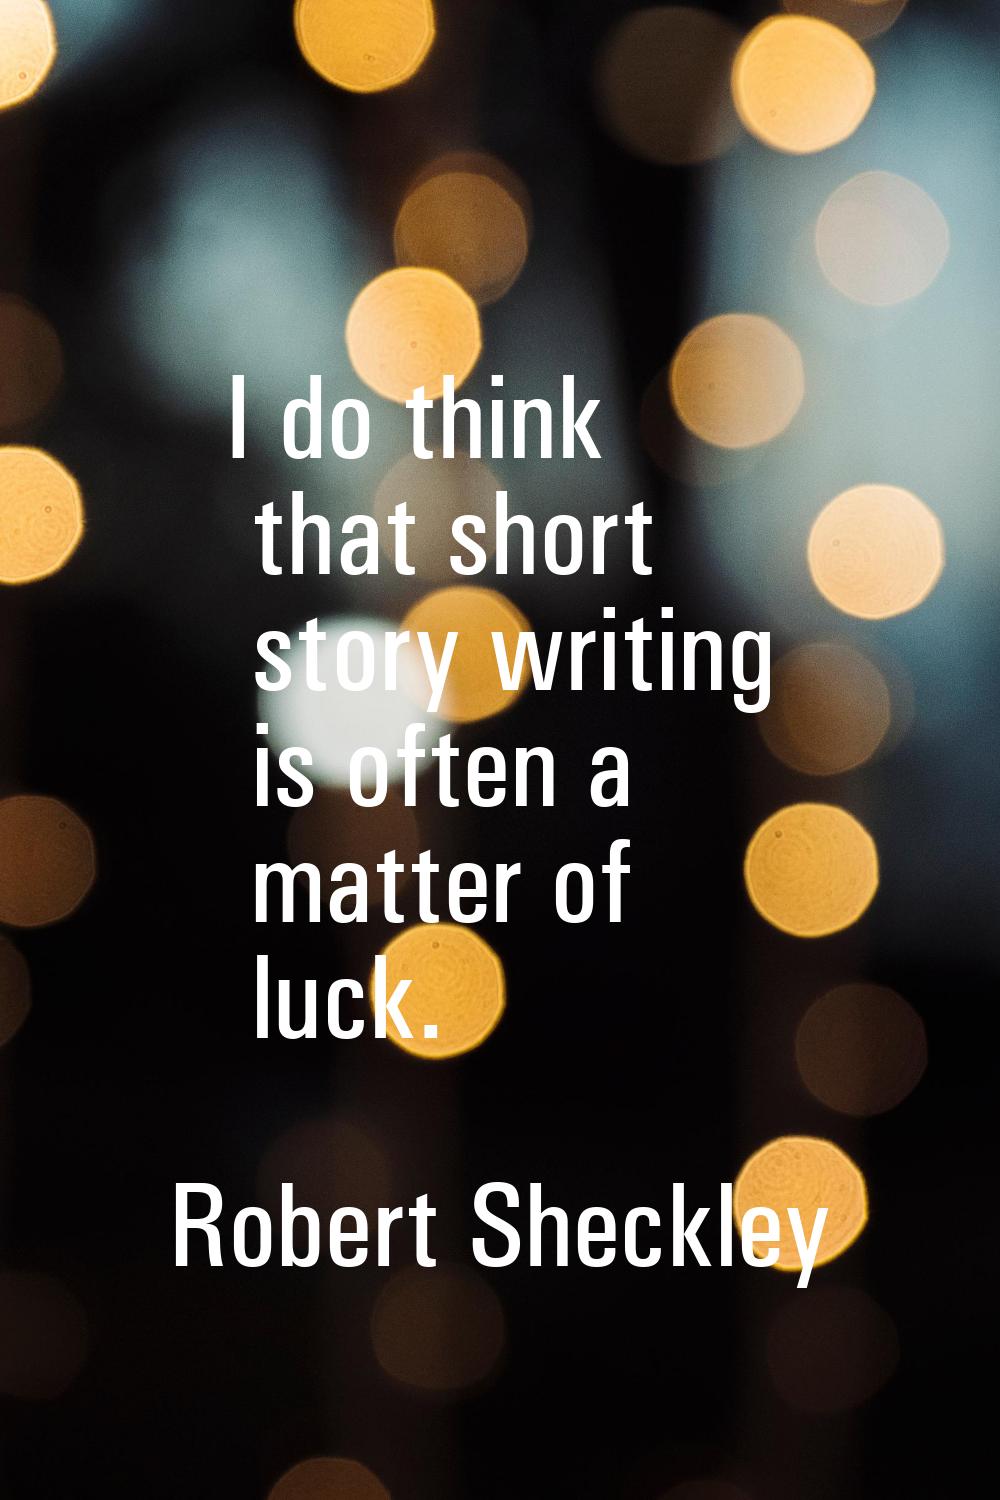 I do think that short story writing is often a matter of luck.